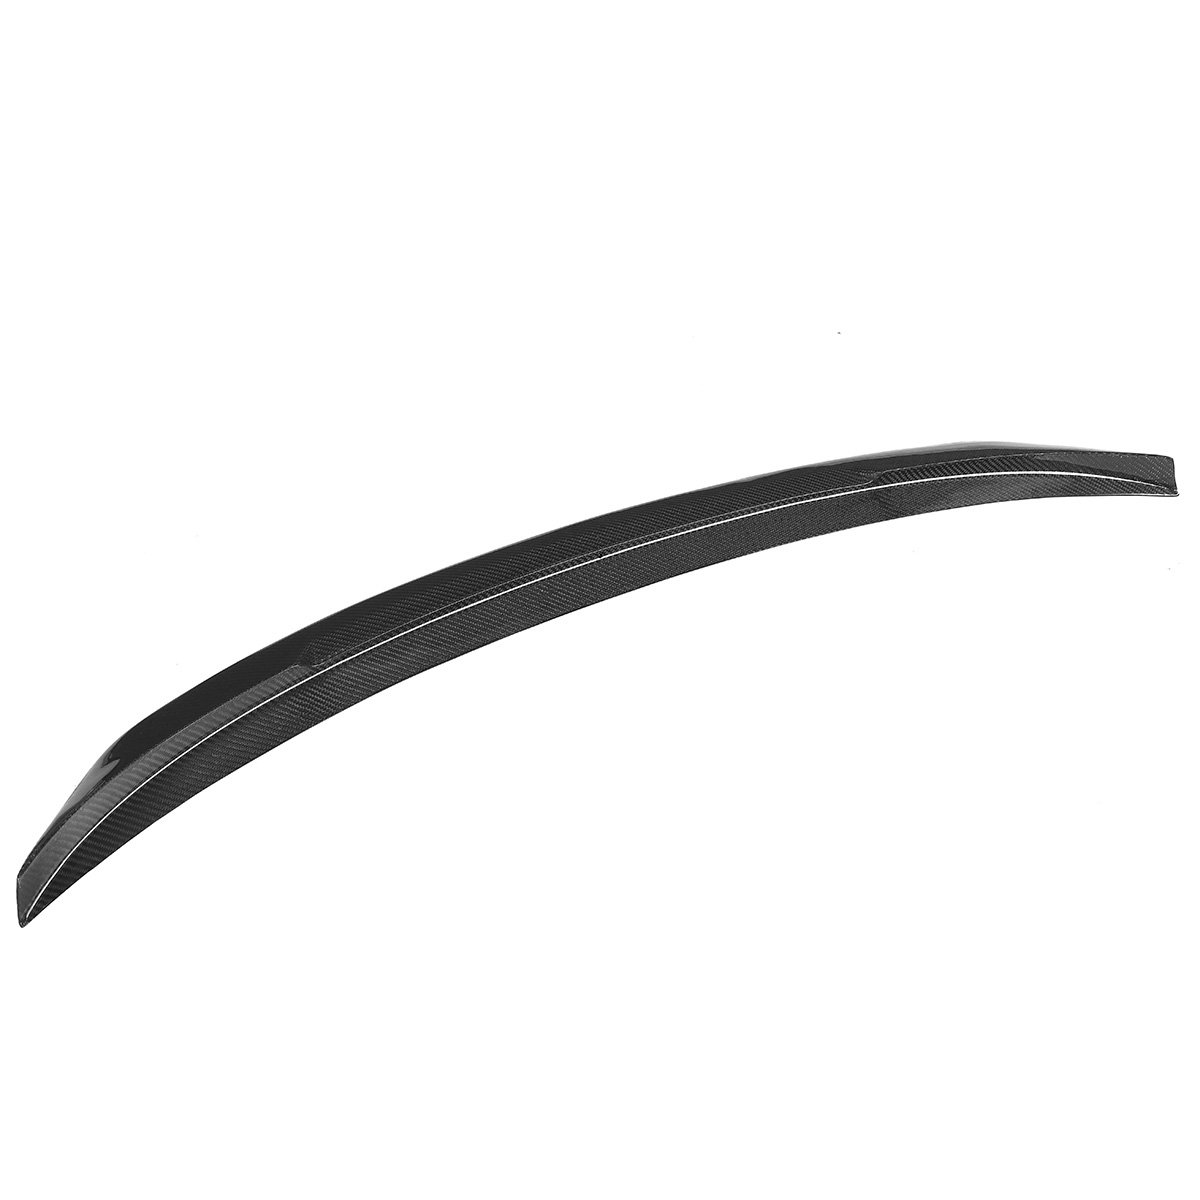 Real-Carbon-Fiber-High-Kick-MP-Style-Trunk-Spoiler-For-BMW-3-Series-2019-2020-1720575